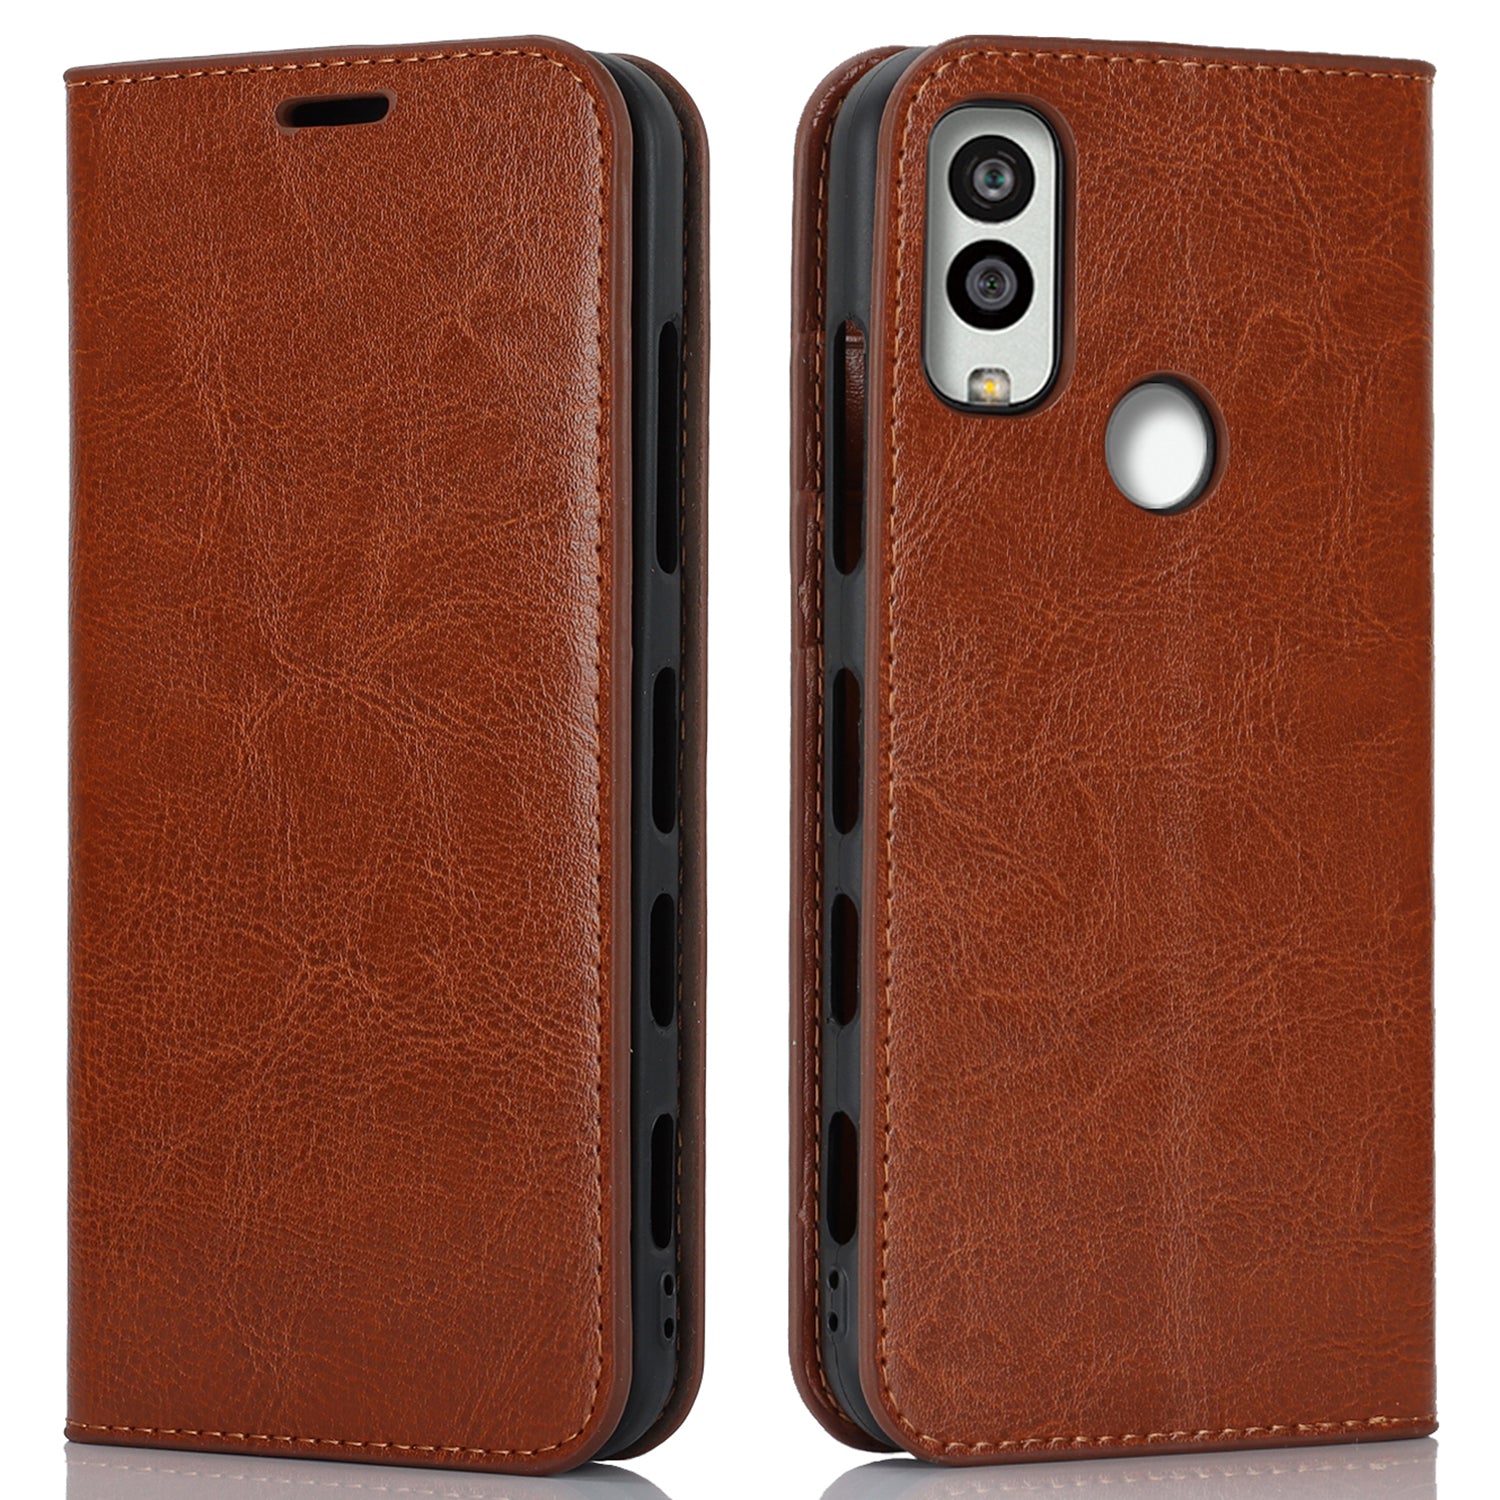 Uniqkart for Kyocera Android One S10 / One S9 Fall Proof Phone Case Crazy Horse Texture Genuine Cow Leather Stand Wallet Cover - Light Brown